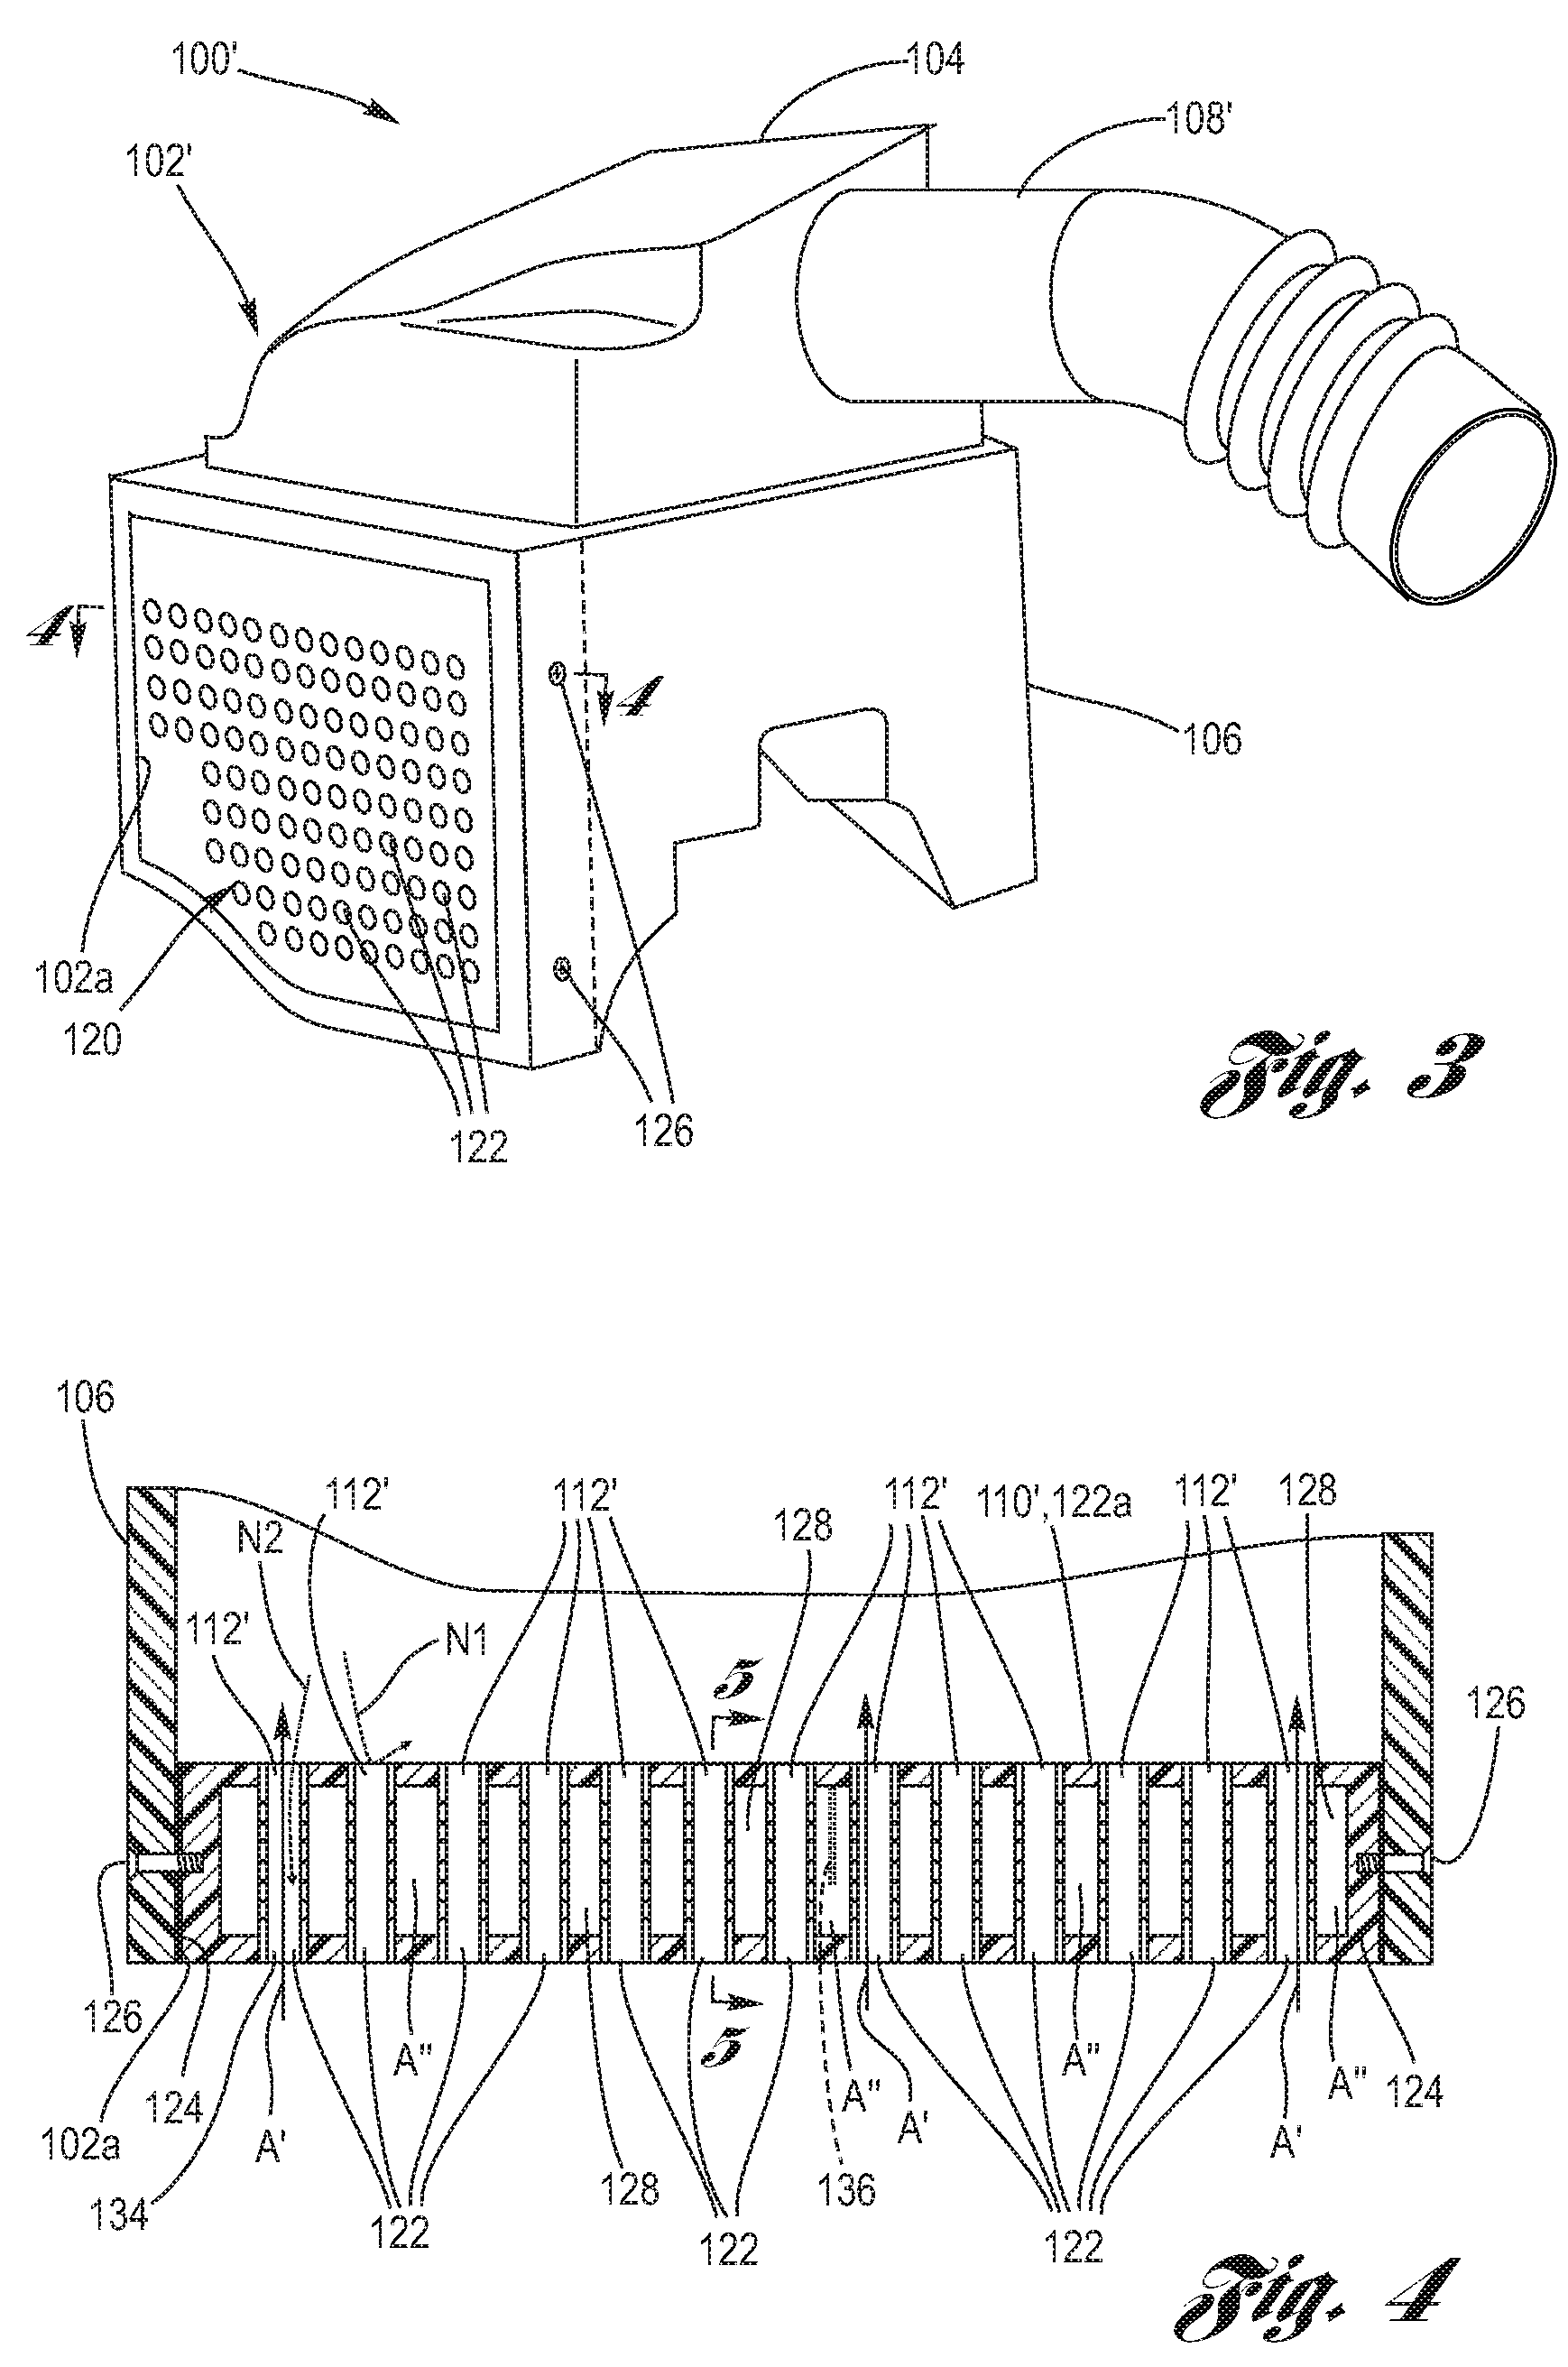 Air induction housing having a perforated wall and interfacing sound attenuation chamber